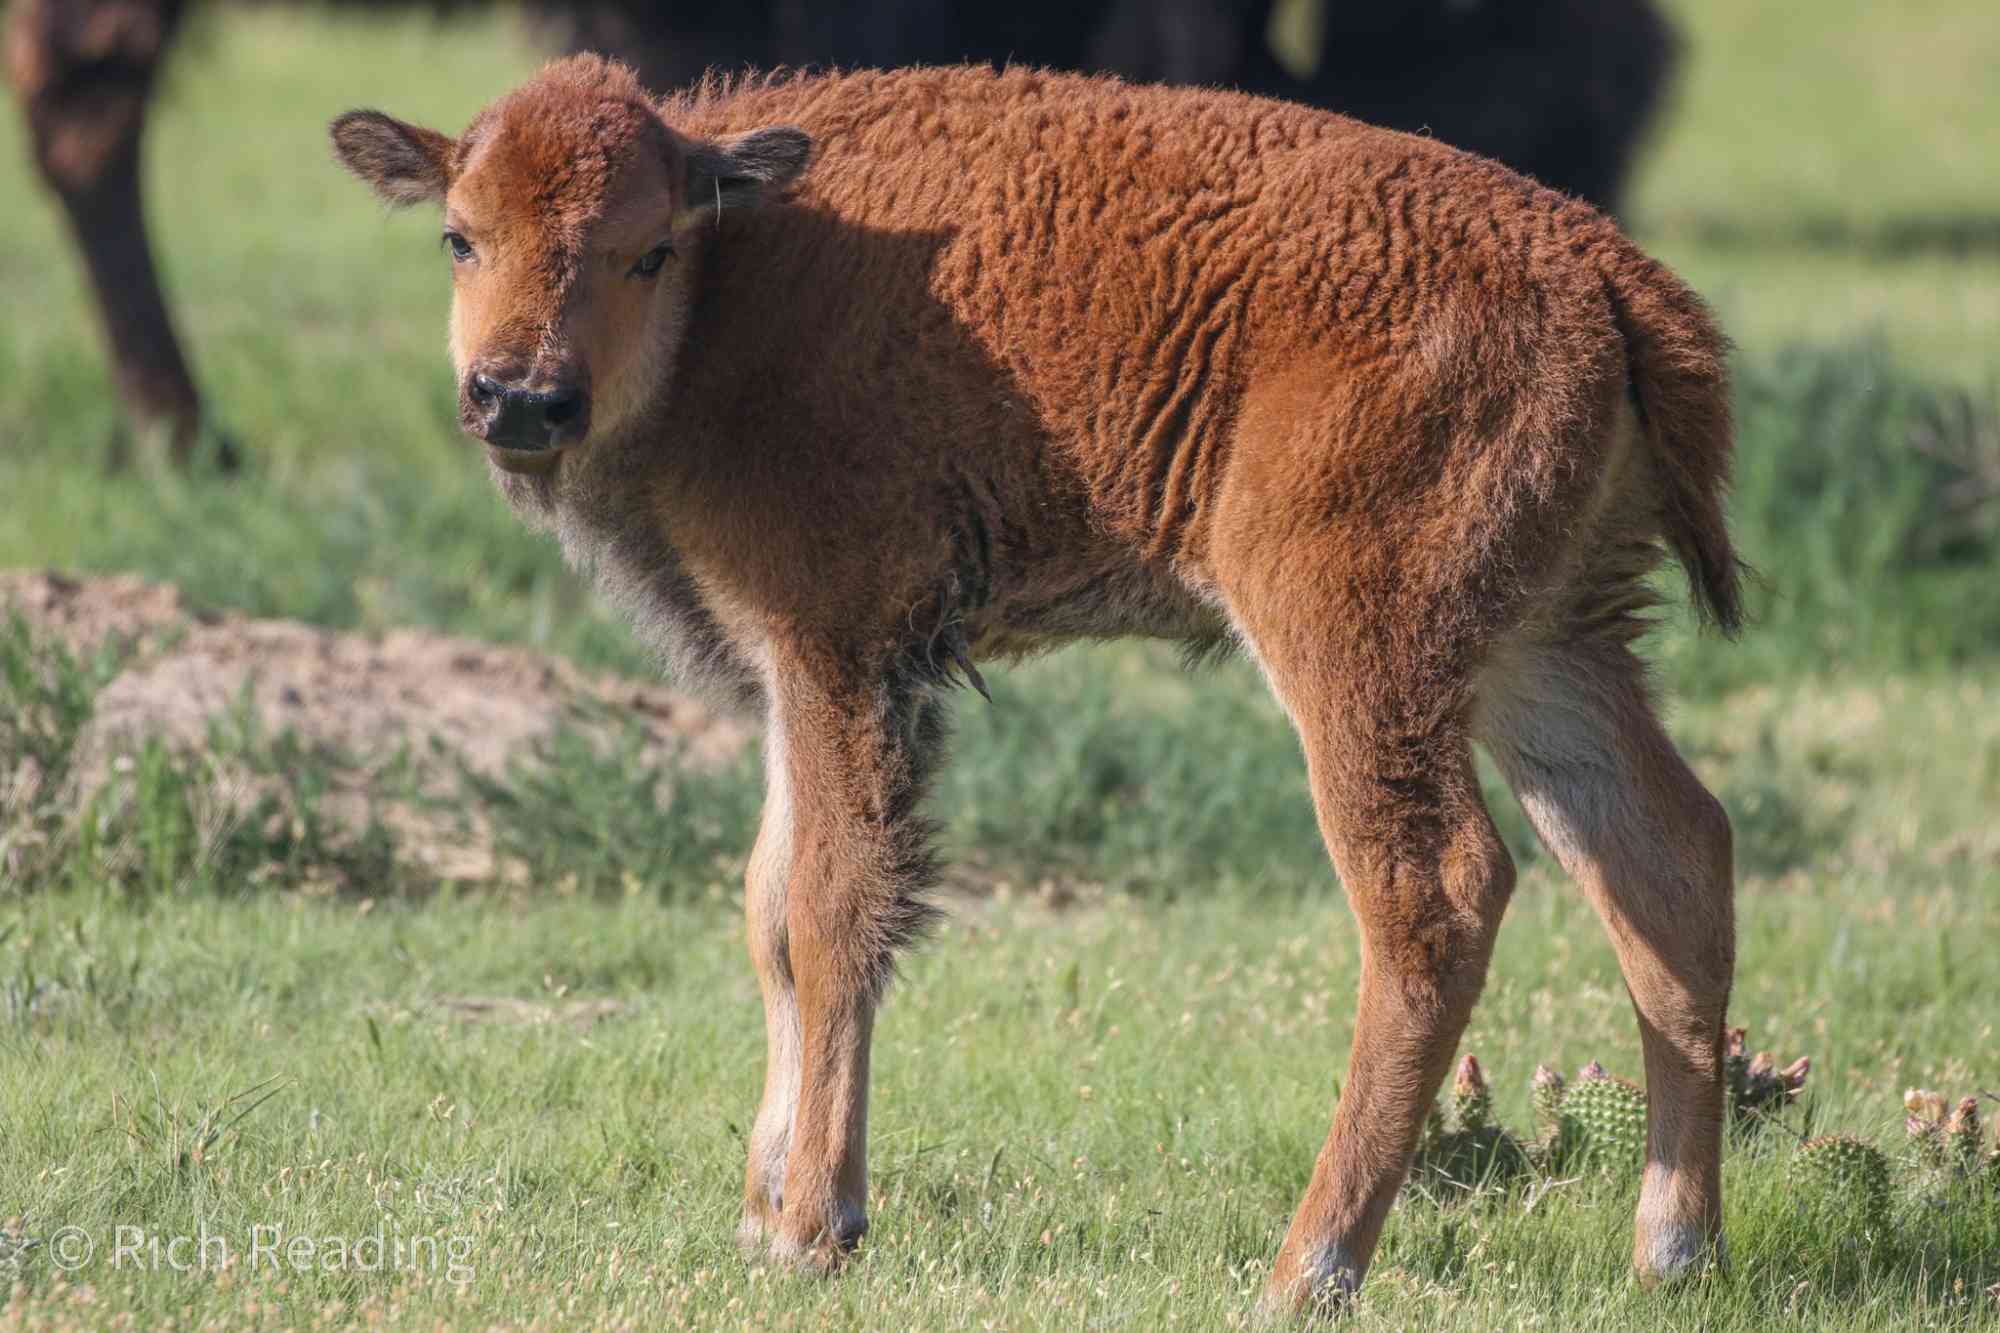 06.2021 - Baby Bison - Heartland Ranch Nature Preserve - Colorado - Rich Reading - Southern Plains Land Trust